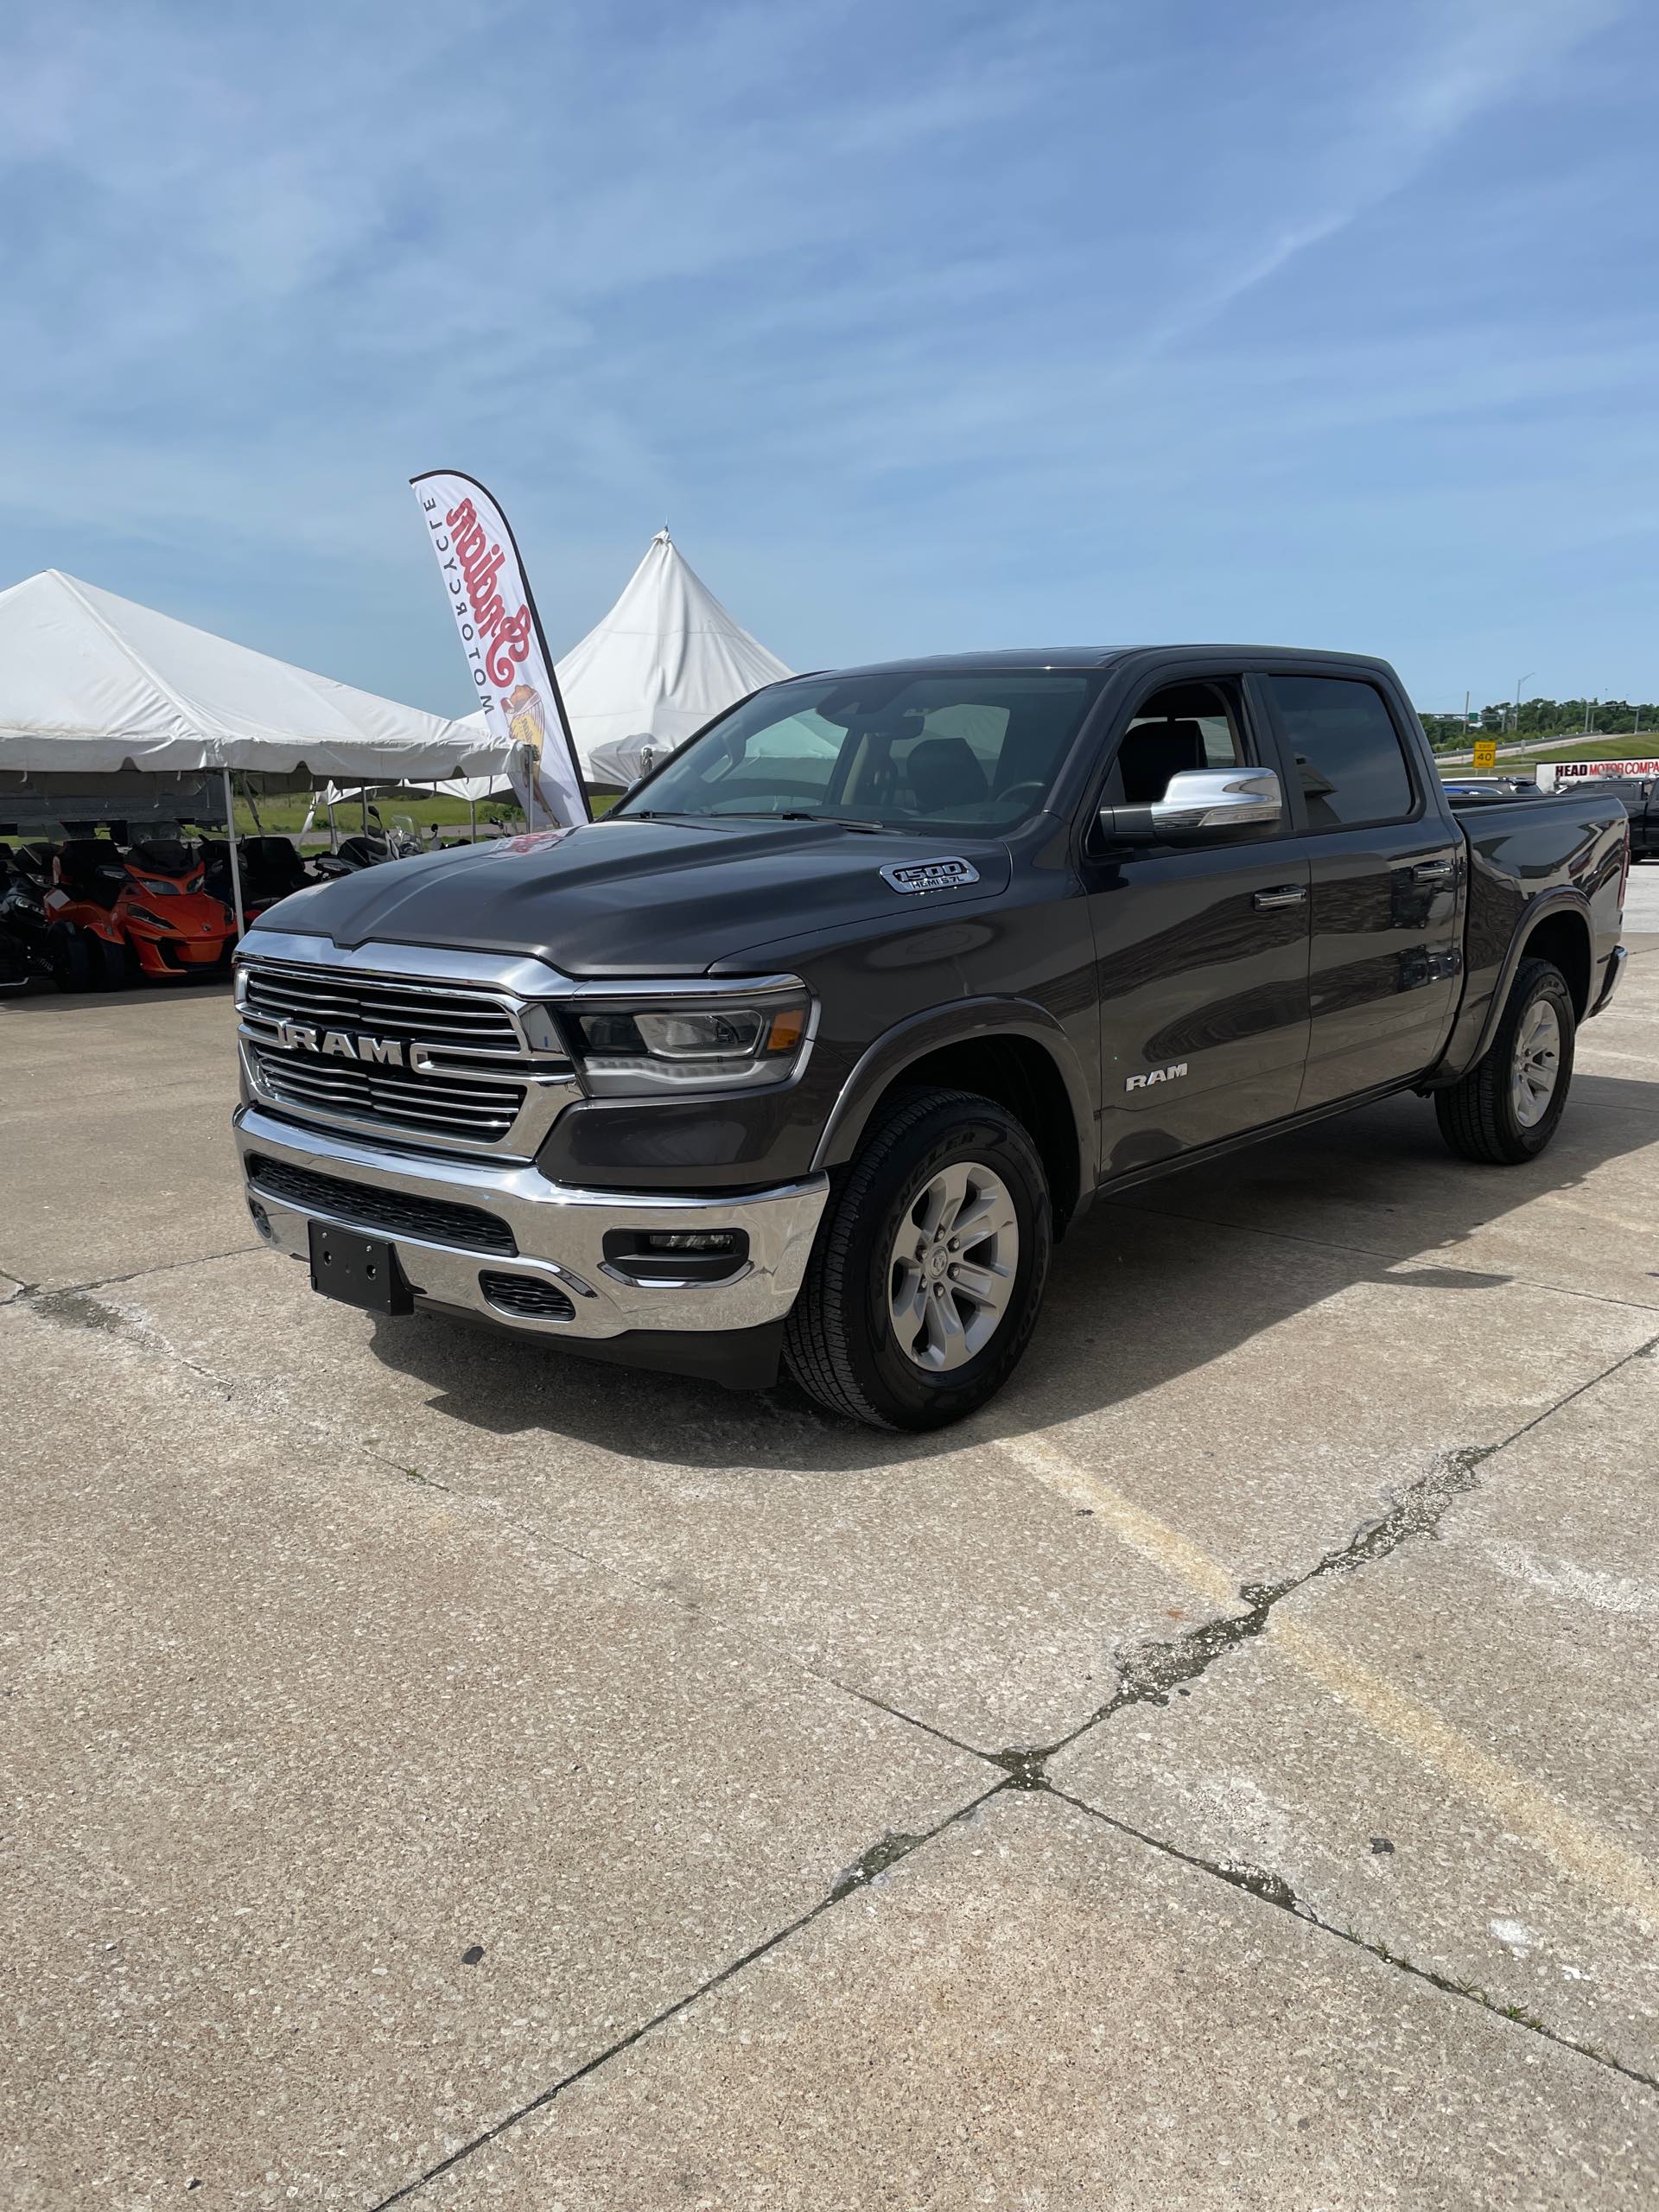 2021 RAM 1500 at Head Indian Motorcycle